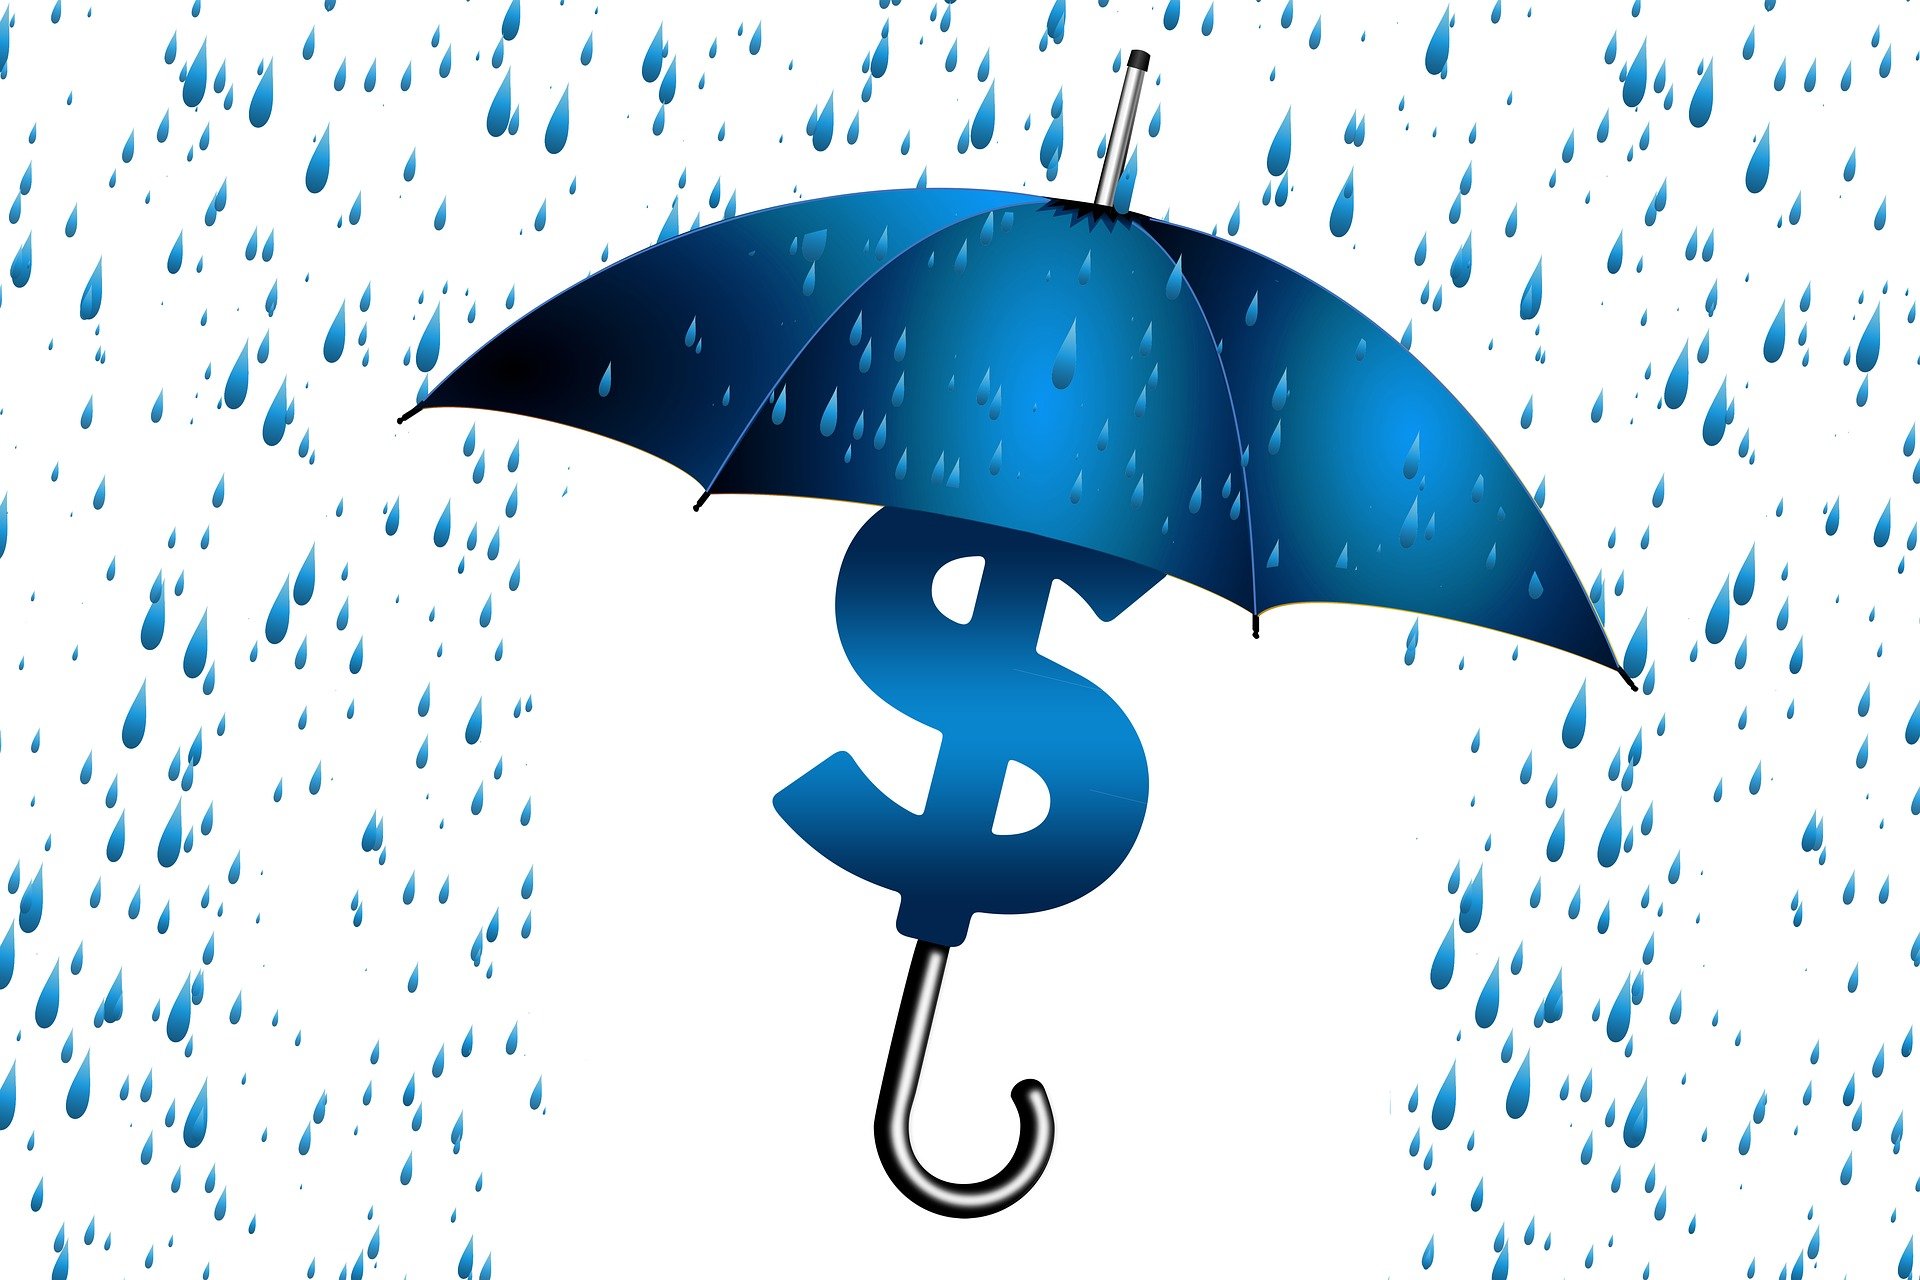 Blue dollar symbol under an umbrella with rain droplets scattered around.